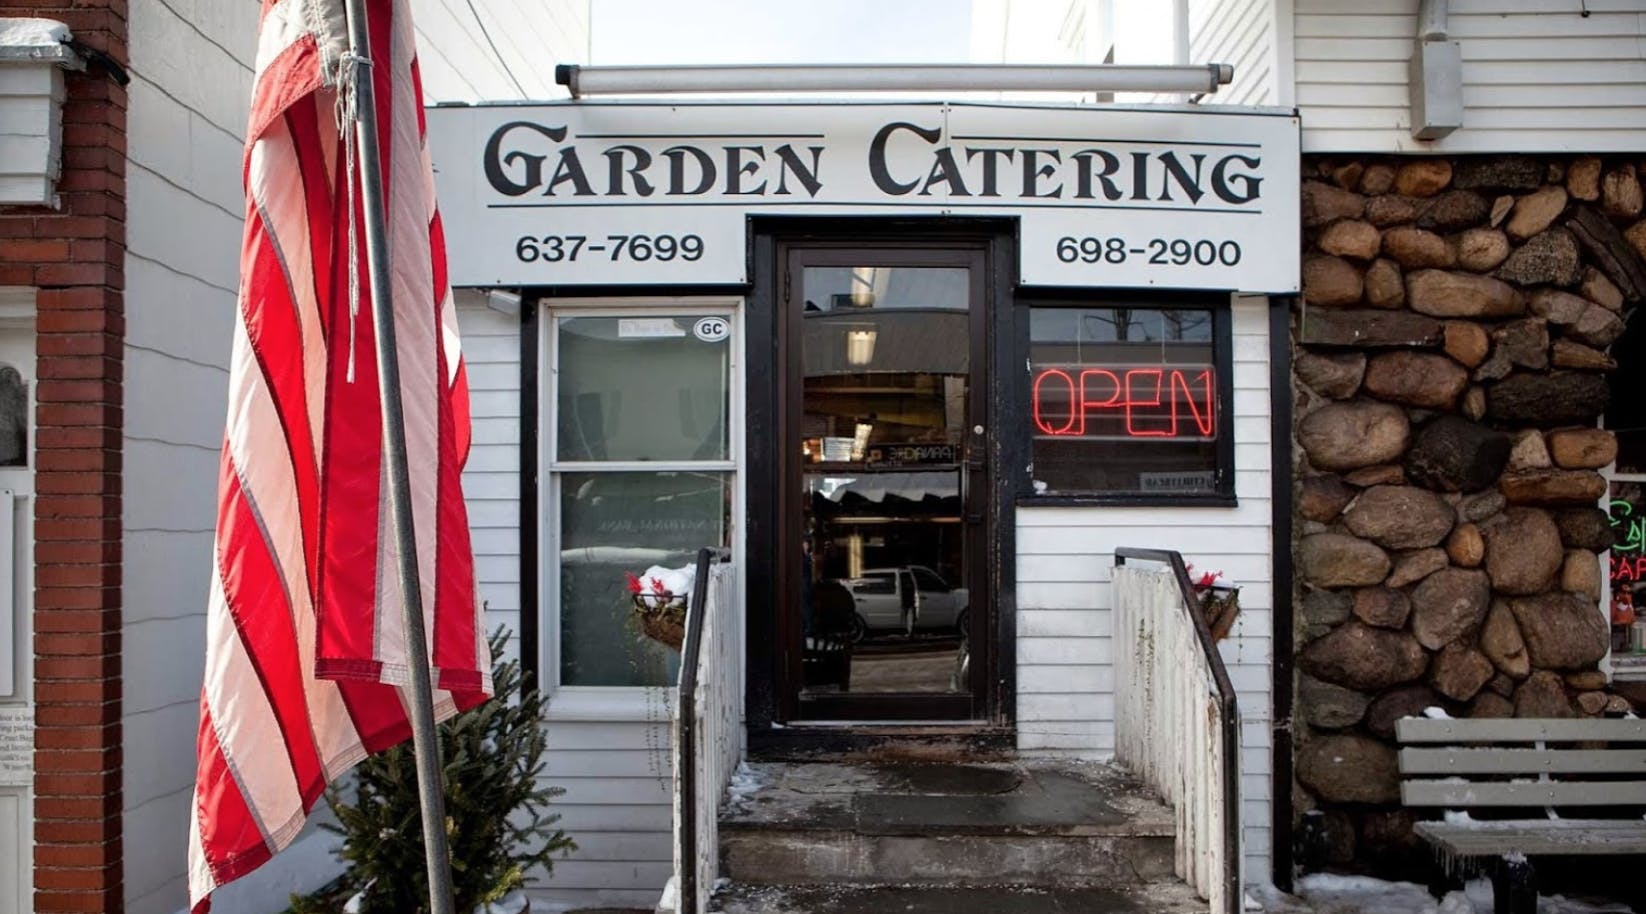 Stamford Downtown Hours Location Garden Catering The Best Nuggets Youll Ever Have - Locations In Ct Ny